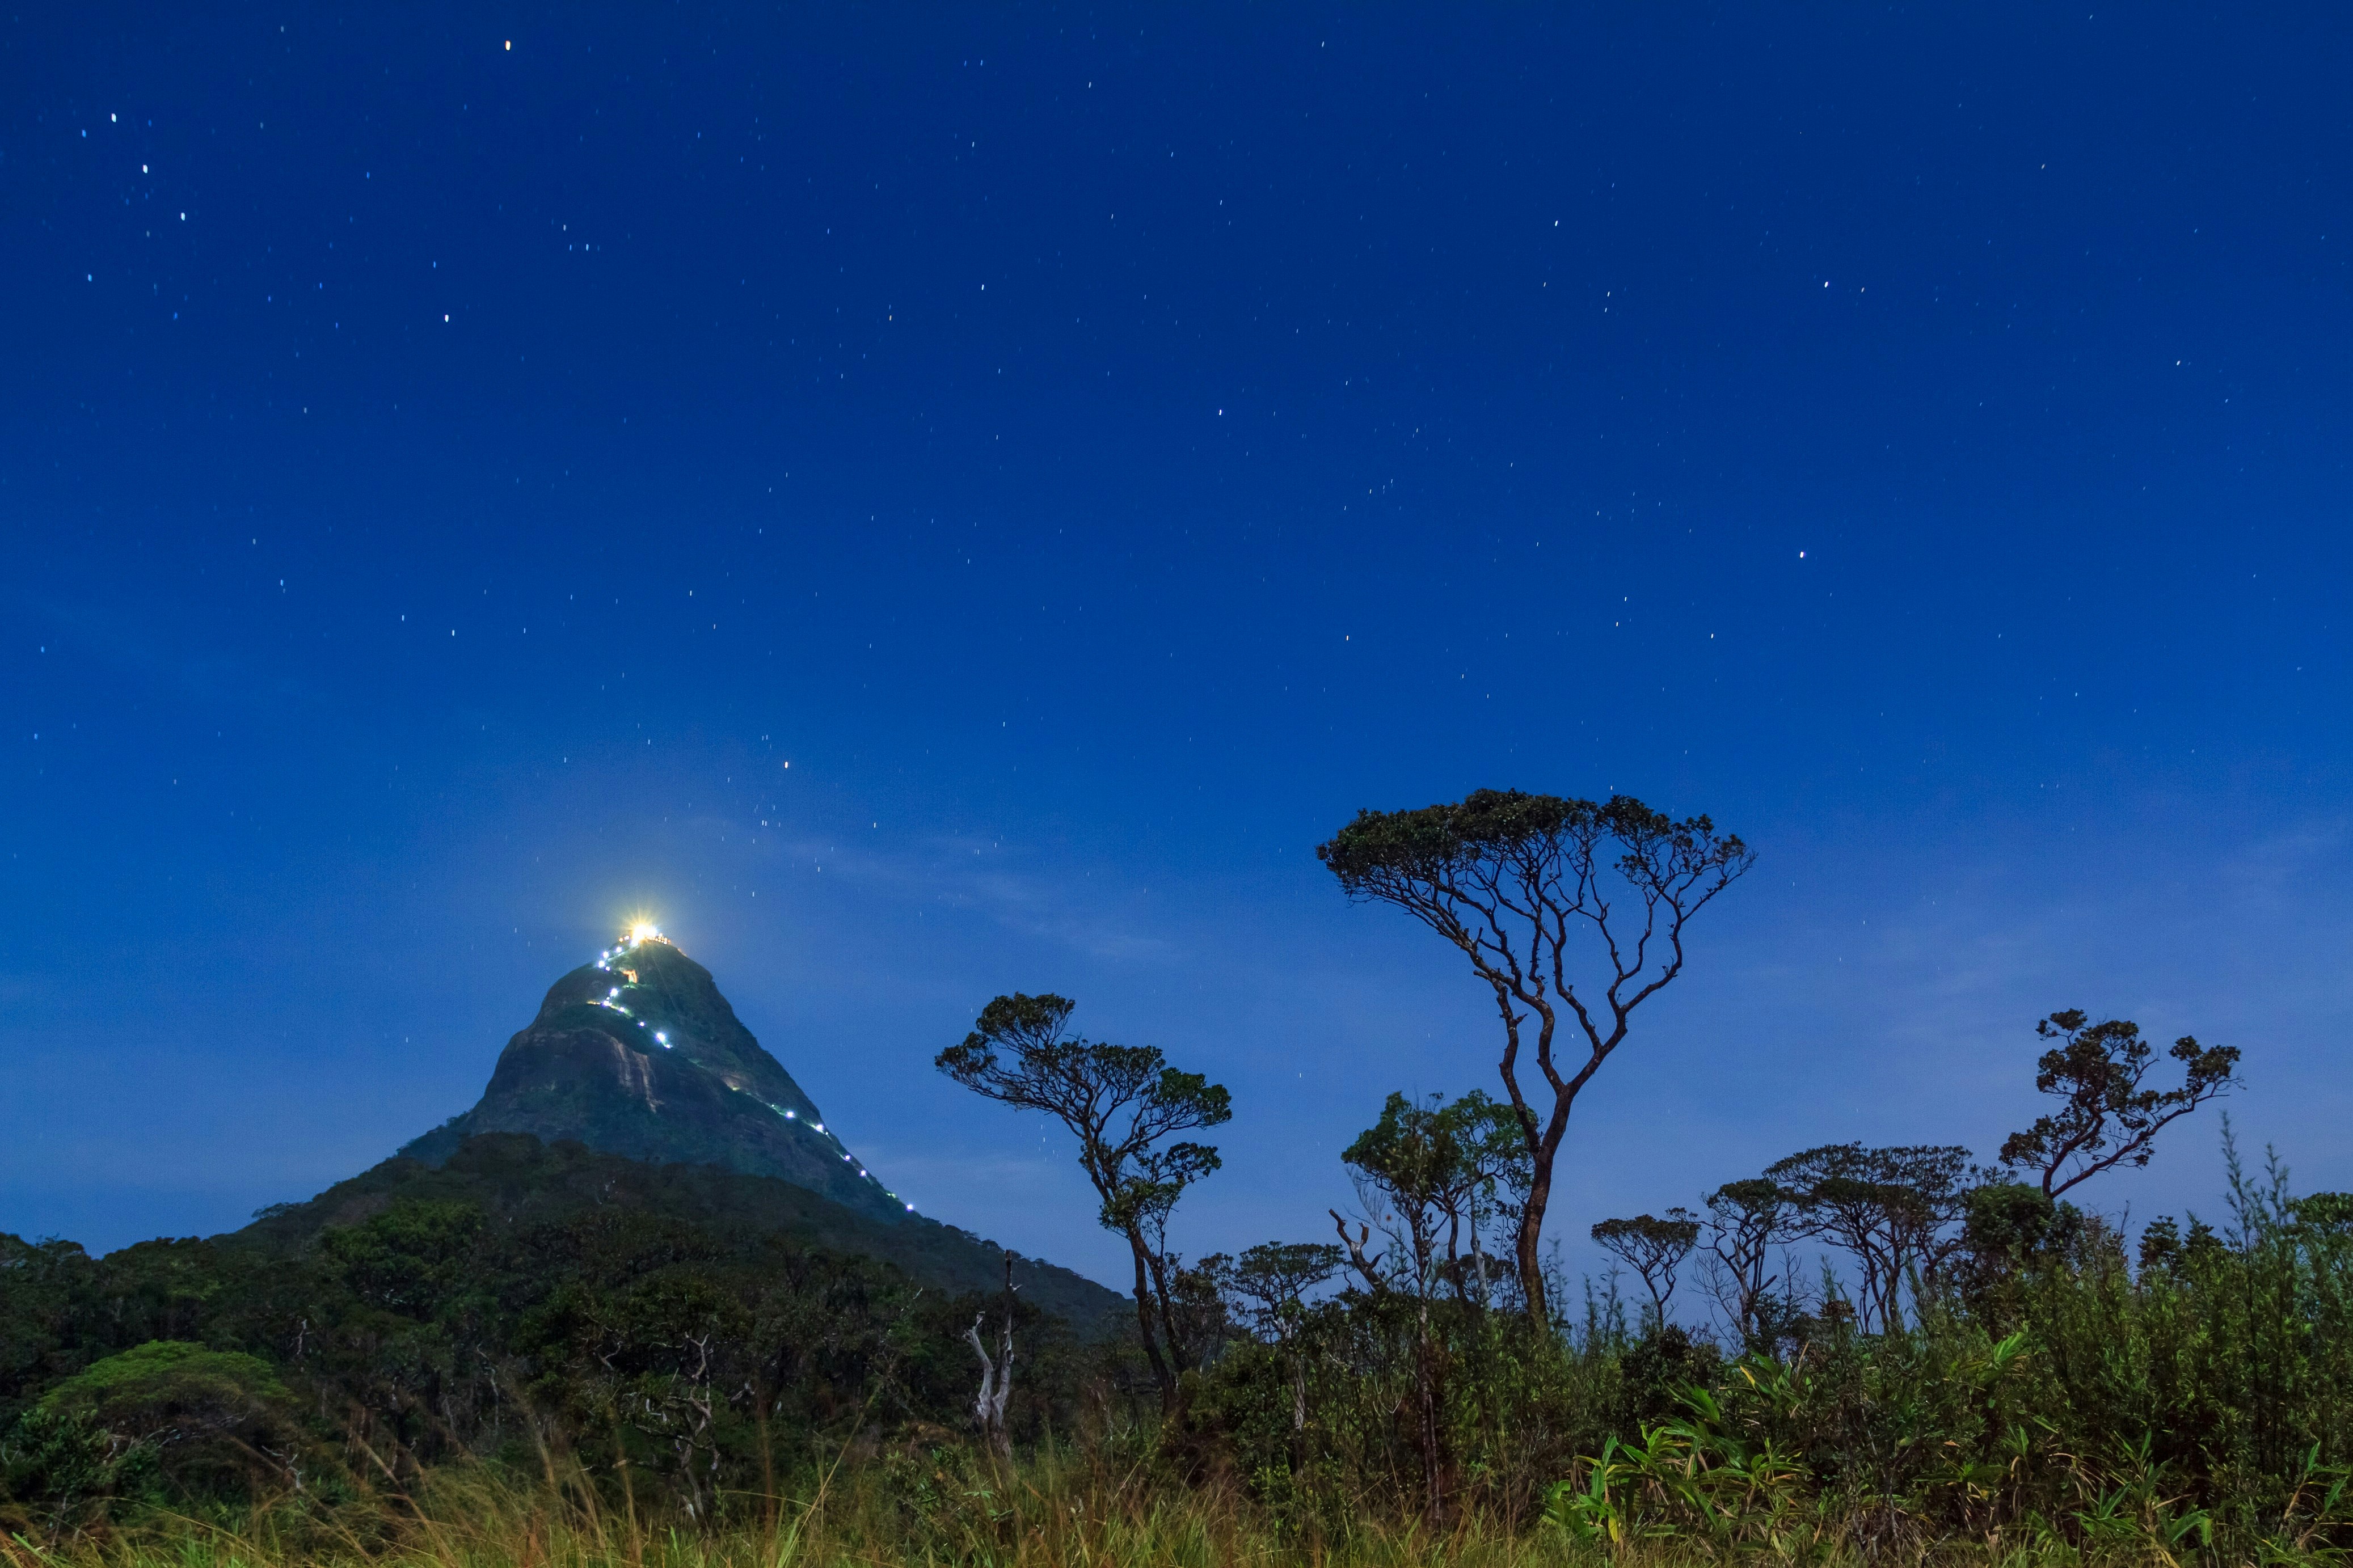 An image of Adam's Peak at night captured from a distance. The illuminated walkway up the mountain is making a light trail that spirals around the mountain, while the rest of the image is dark.